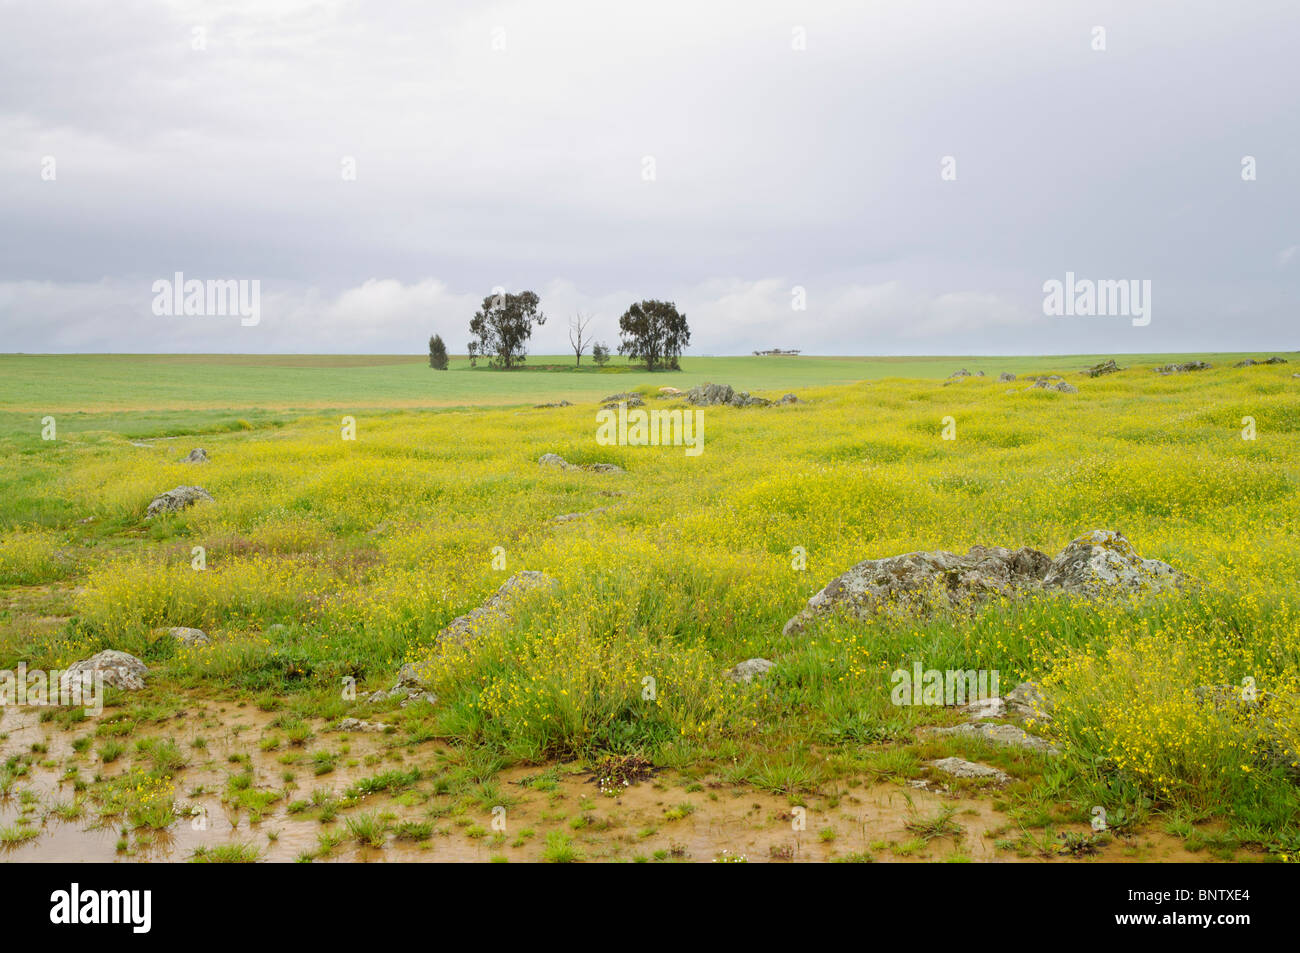 Distant trees in plain agricultural landscape of Extremadura, Spain Stock Photo